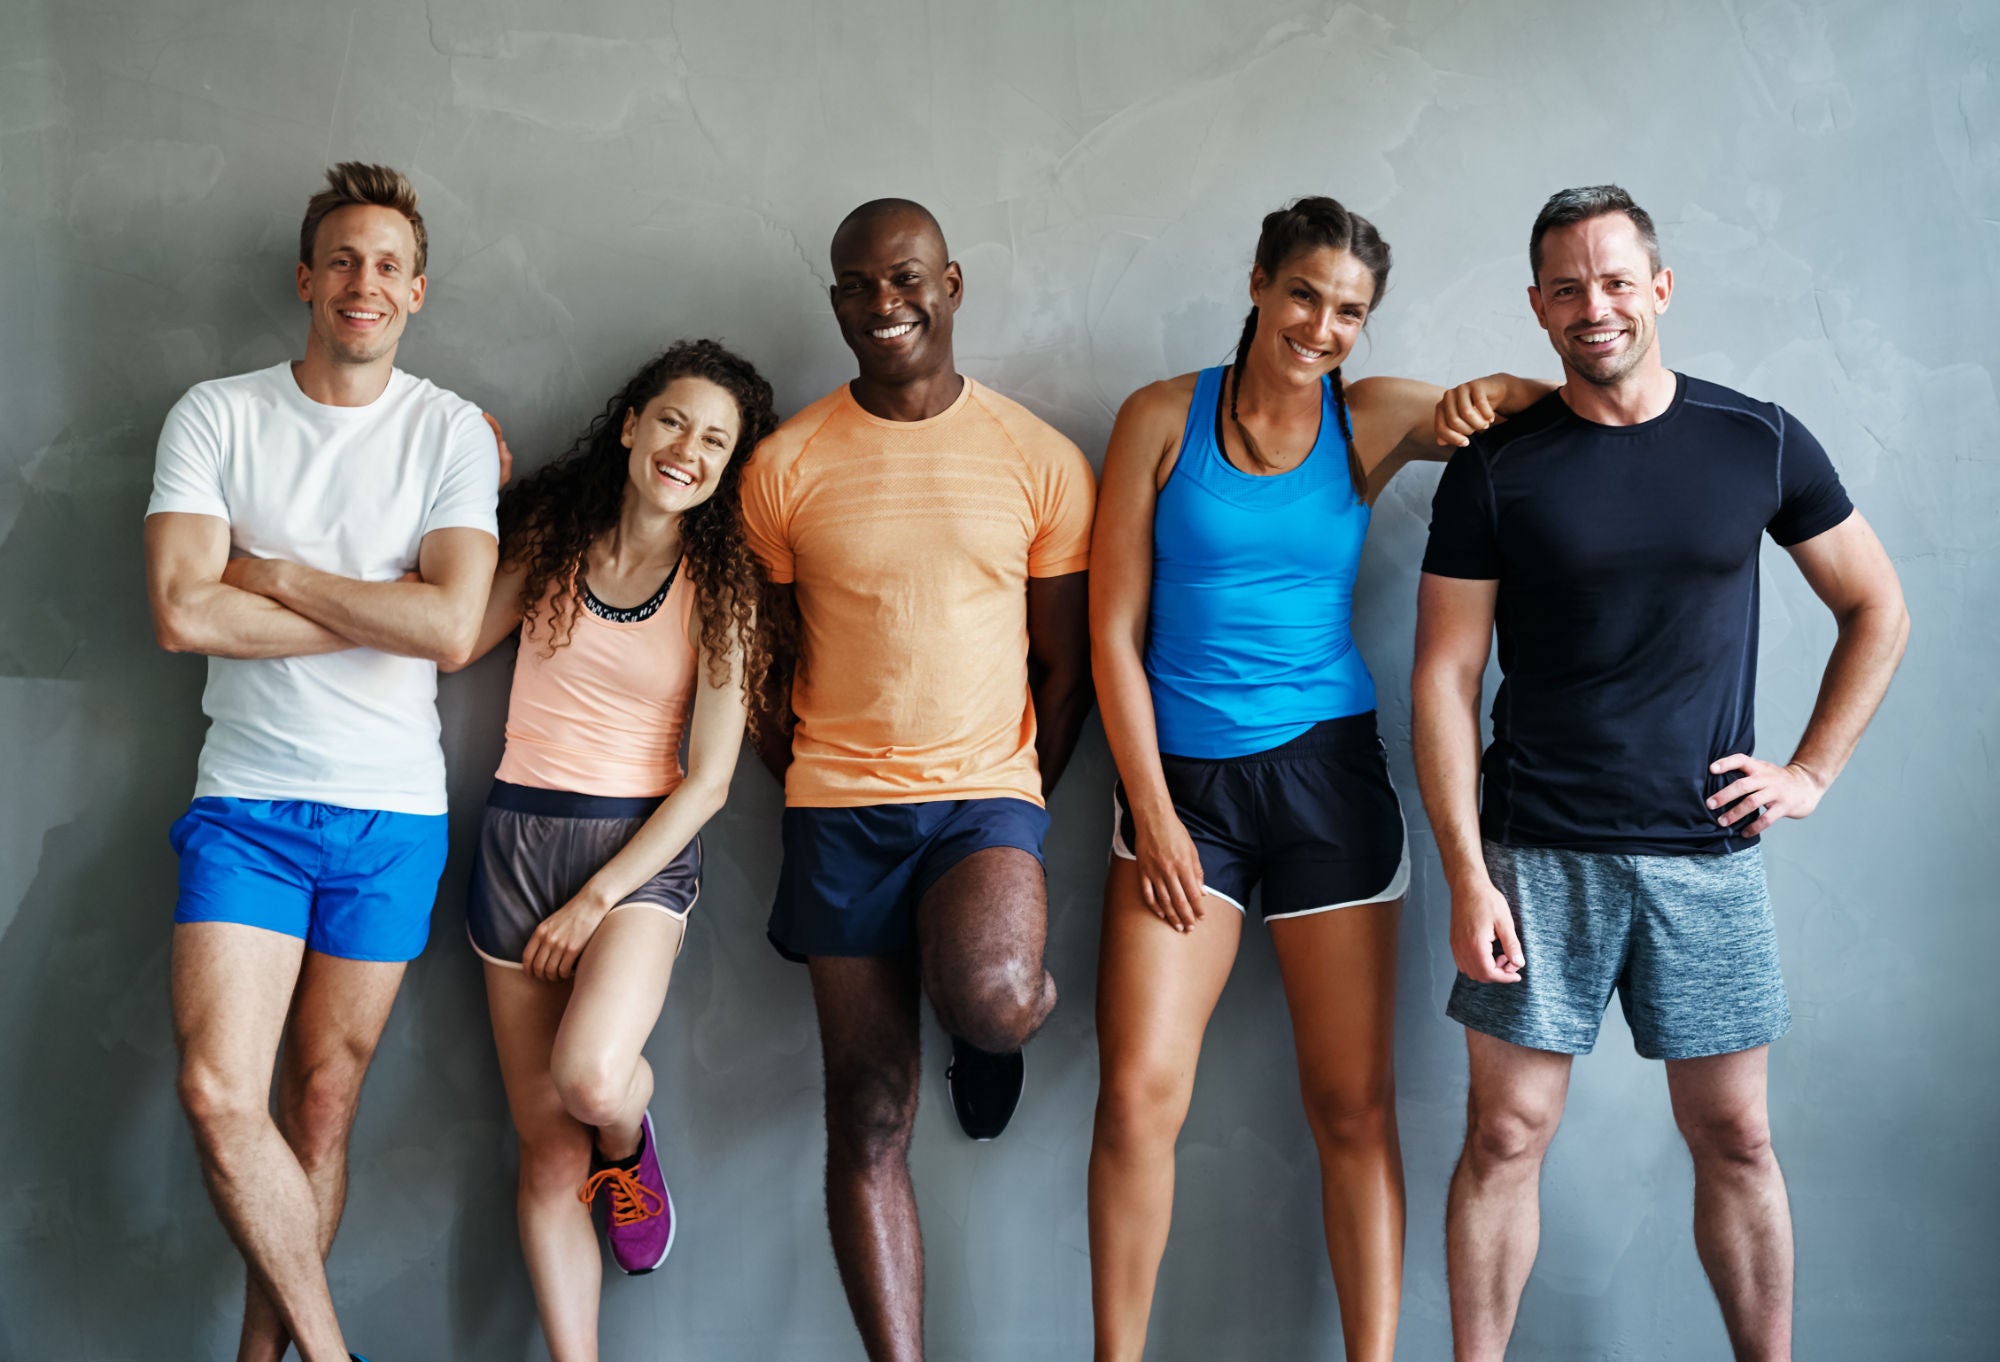 A group of fitness friends smiling and preparing for a workout